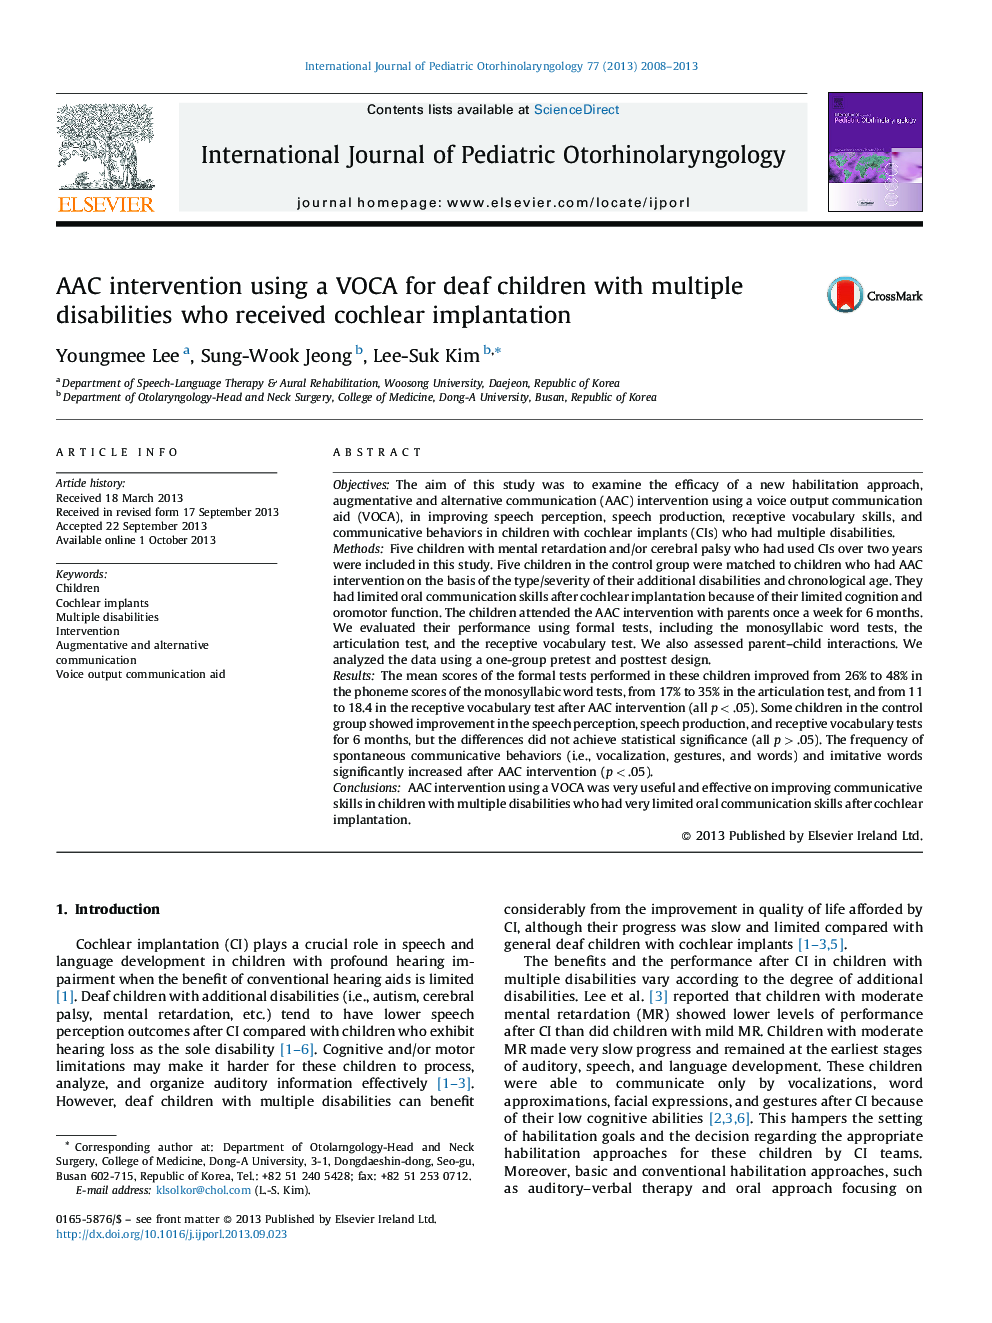 AAC intervention using a VOCA for deaf children with multiple disabilities who received cochlear implantation